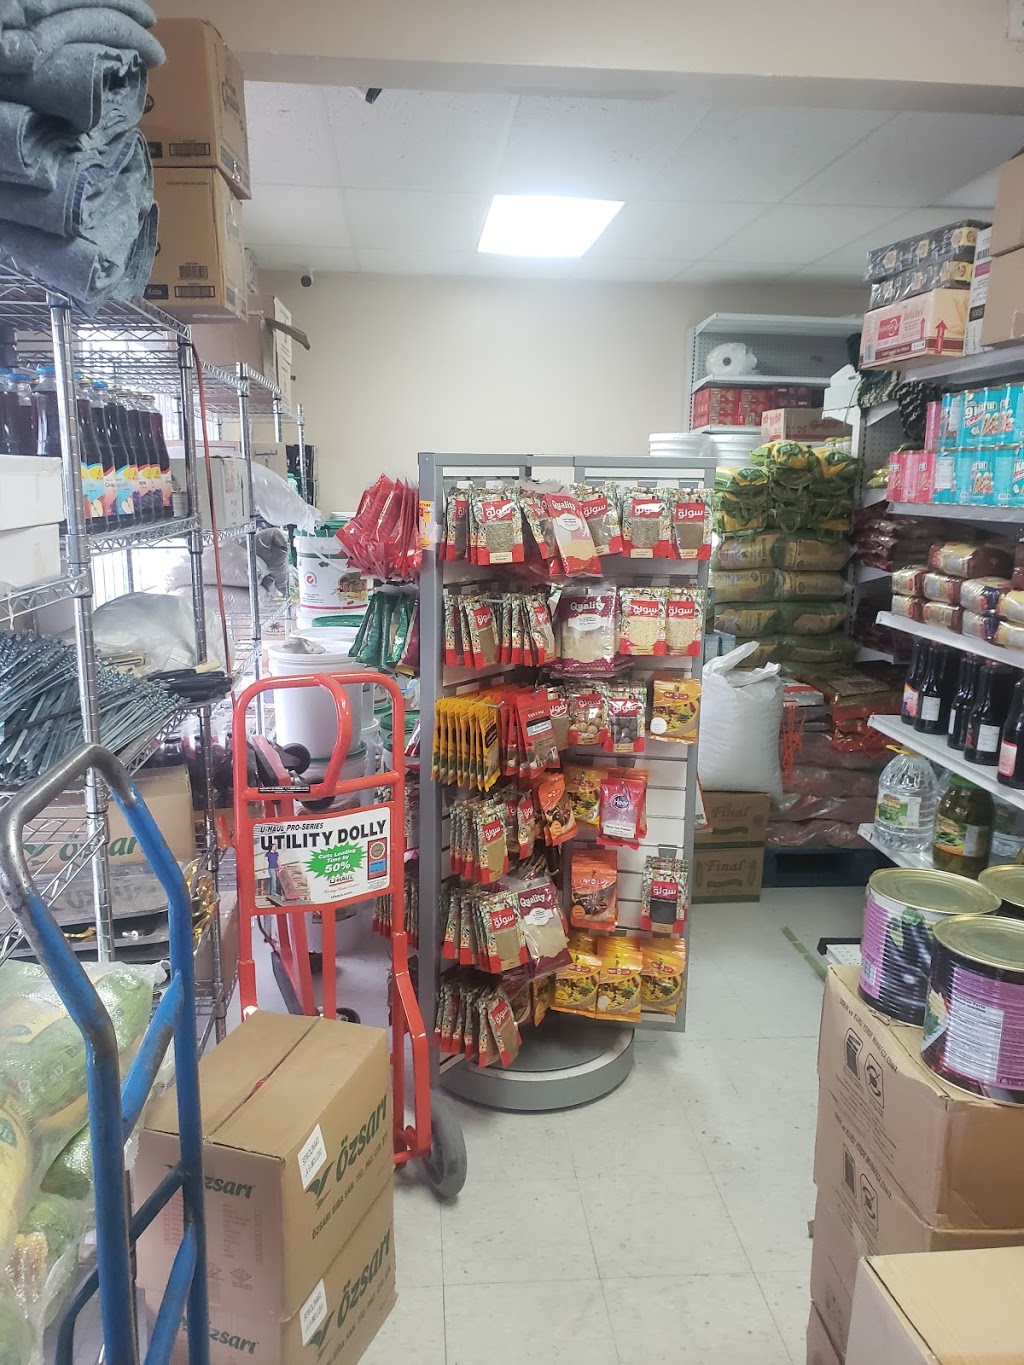 Mediterranean Halal Meats and Grocery | 3107 E 45th Ave, Vancouver, BC V5R 3C9, Canada | Phone: (604) 430-1363